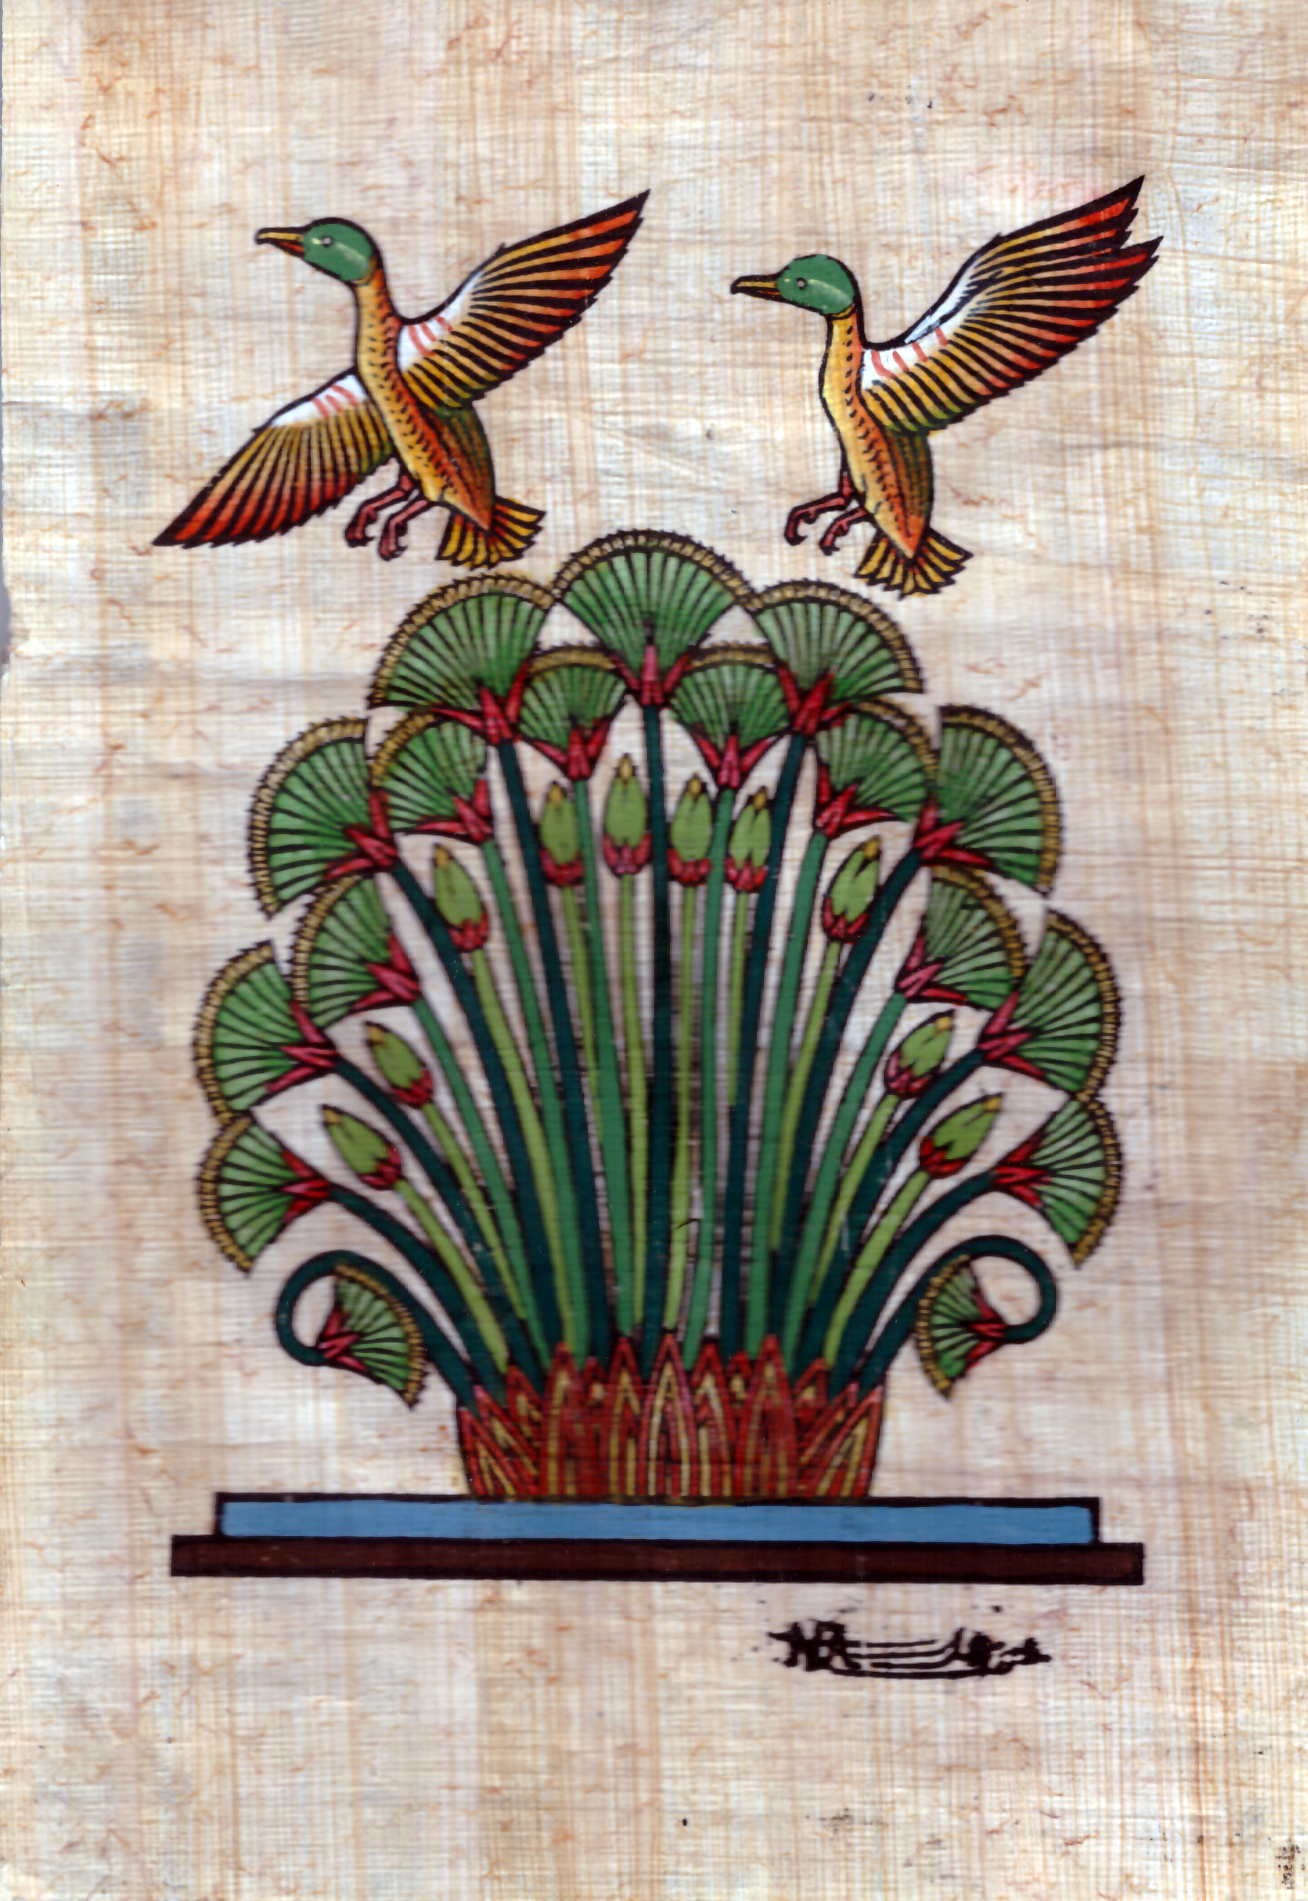 Two Ducks Flying Over a Papyrus. Source: author's library.